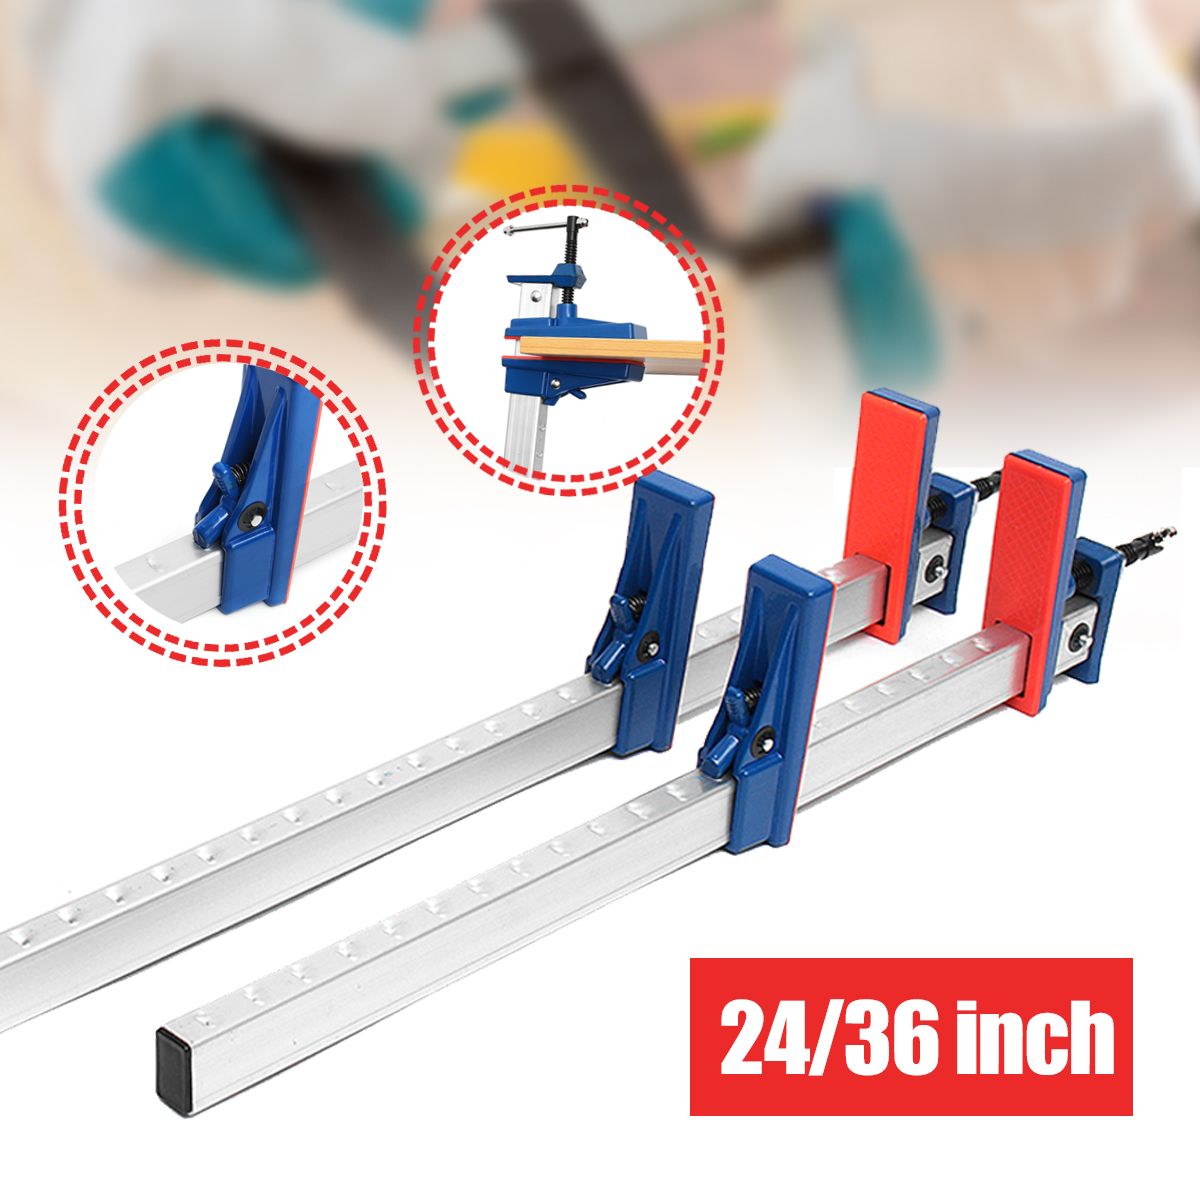 2436-Inch-Aluminum-F-Clamp-Bar-Heavy-Duty-Holder-Grip-Release-Parallel-Adjustable-Woodworking-Tool-1361735